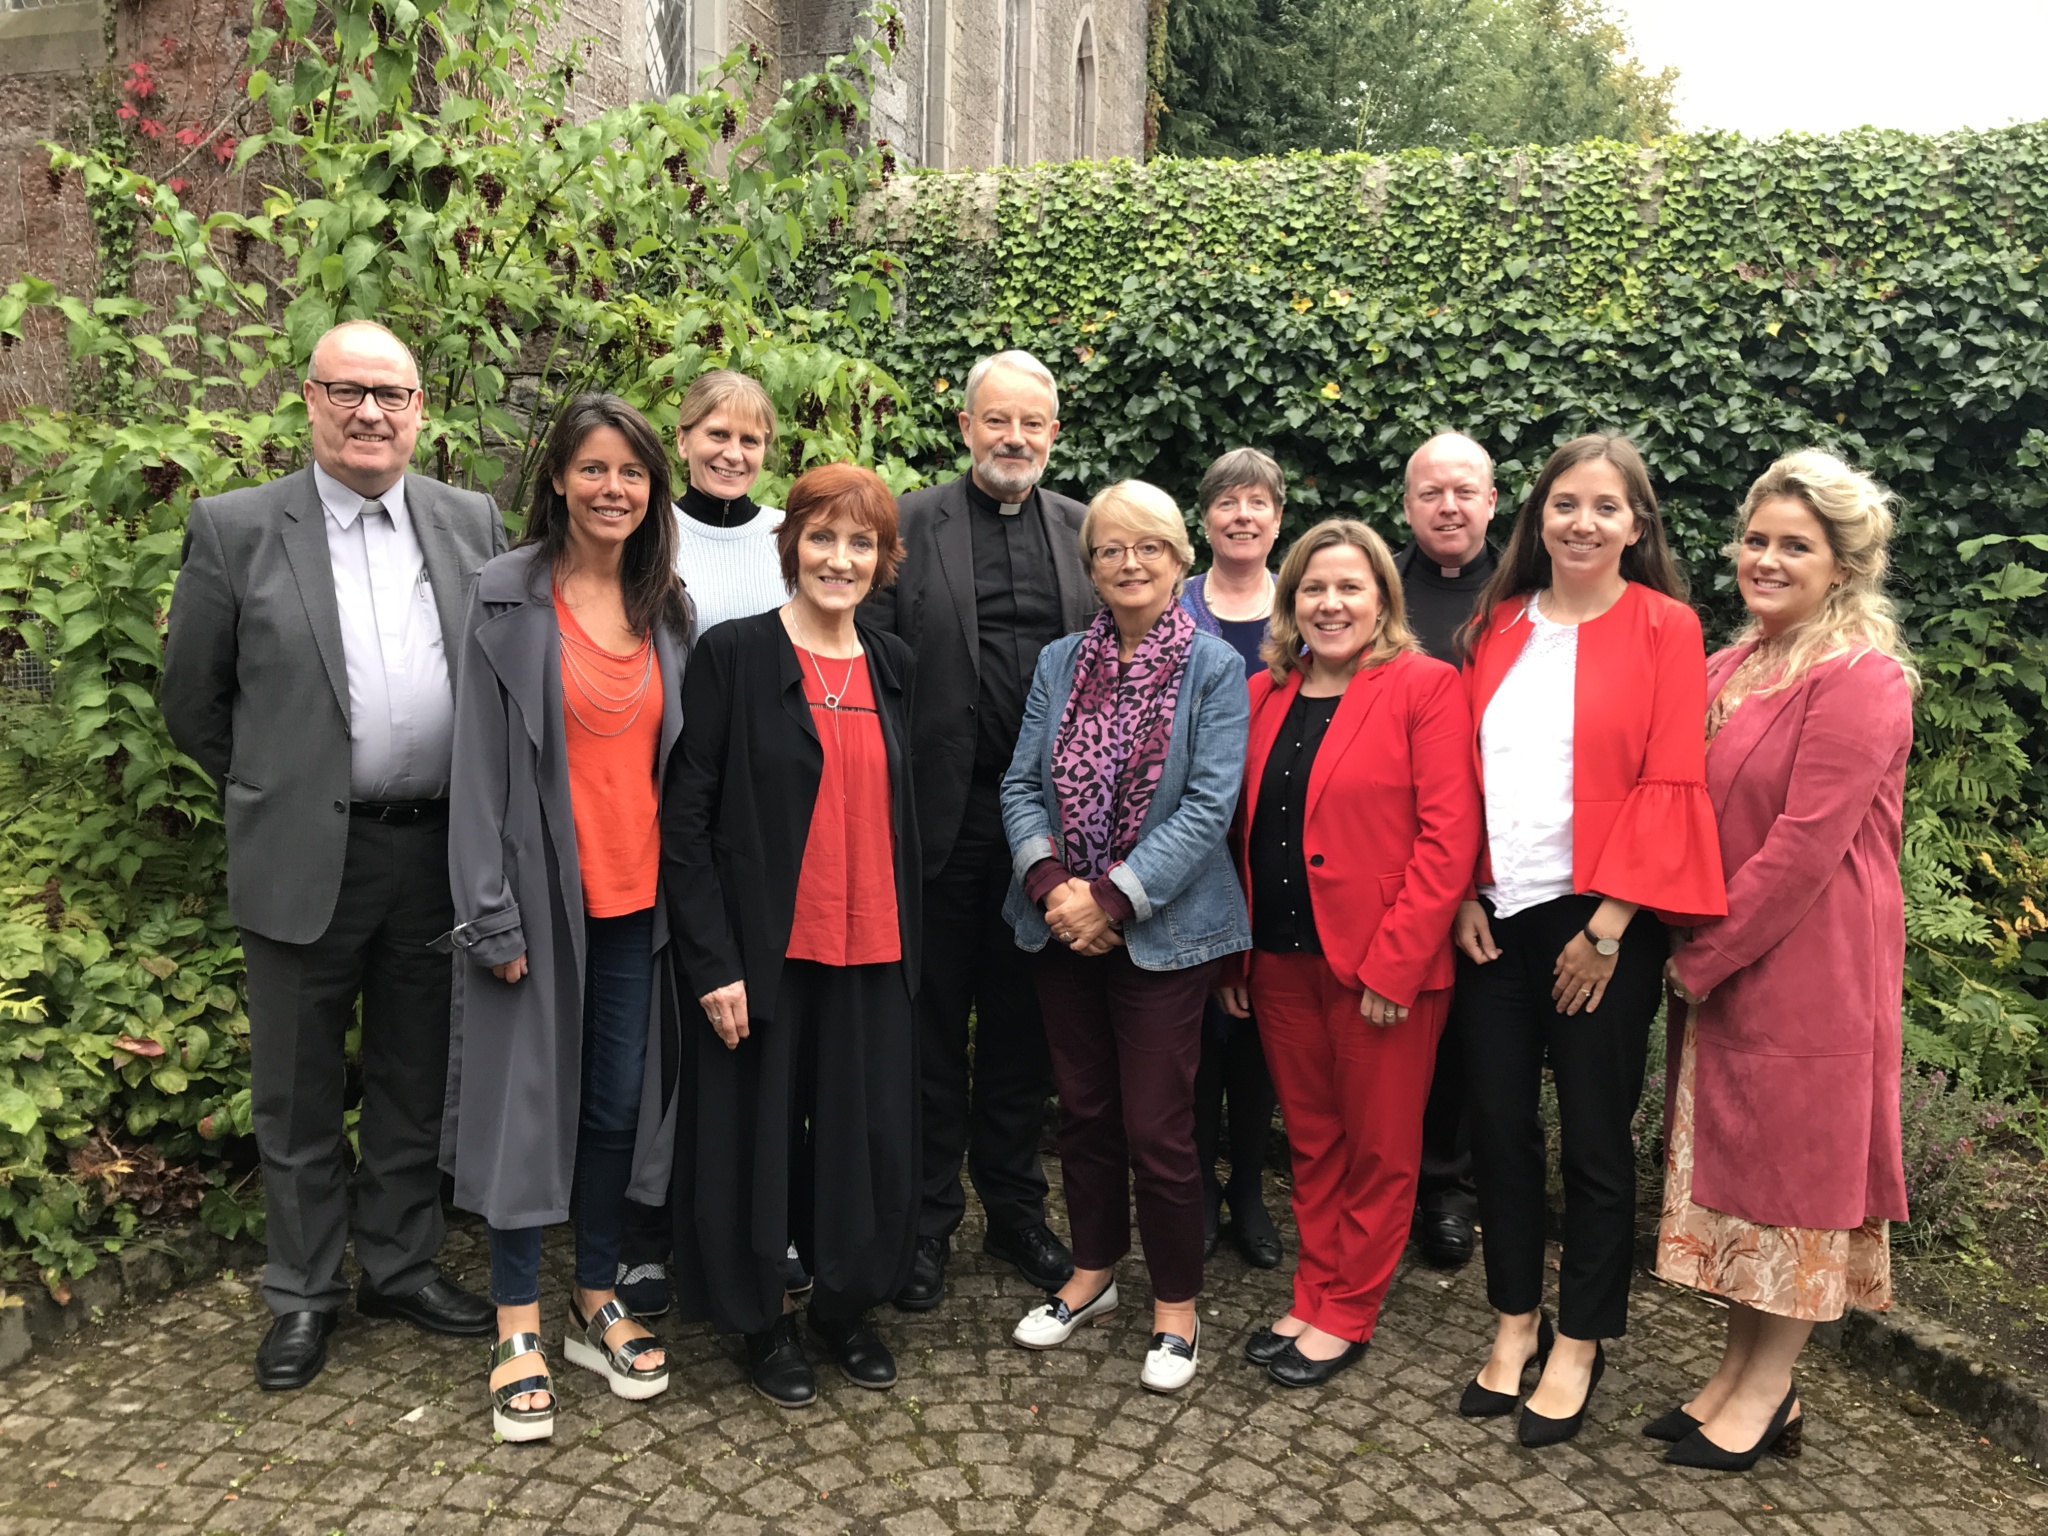 Inaugural meeting of the Council for Life takes place in Maynooth